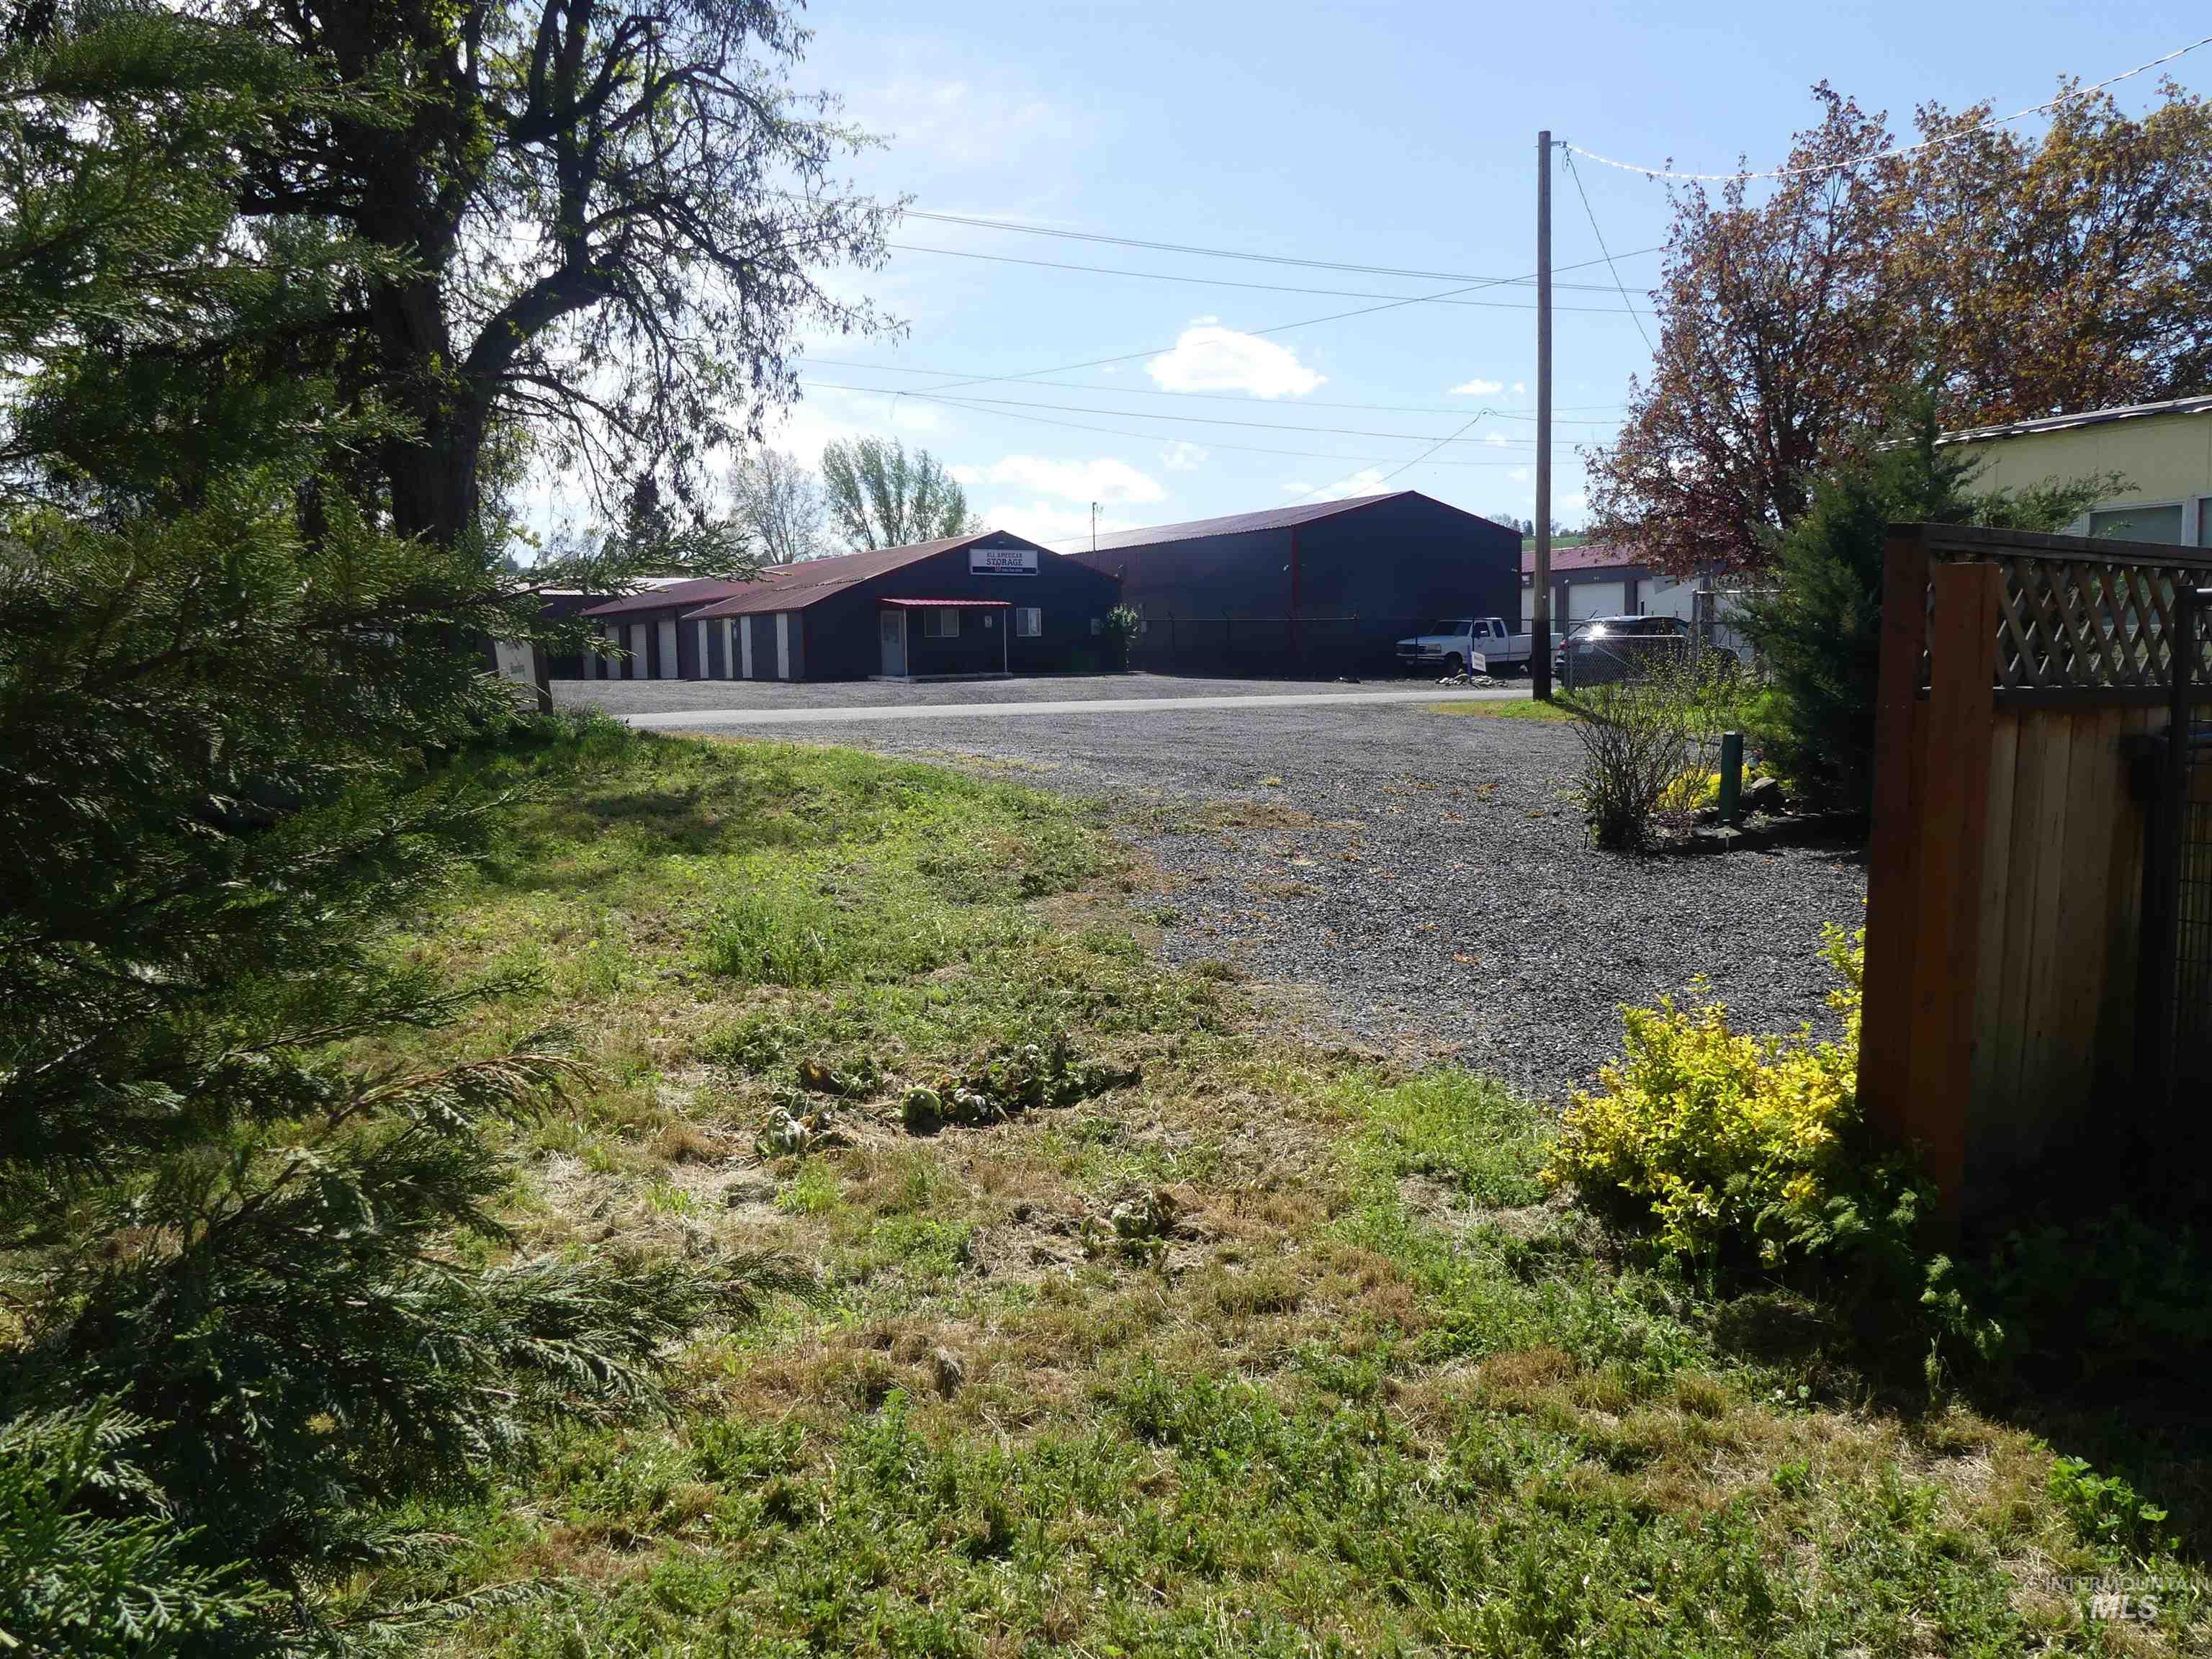 1504 Maple St, Clarkston, Washington 99403, Business/Commercial For Sale, Price $100,000,MLS 98906848